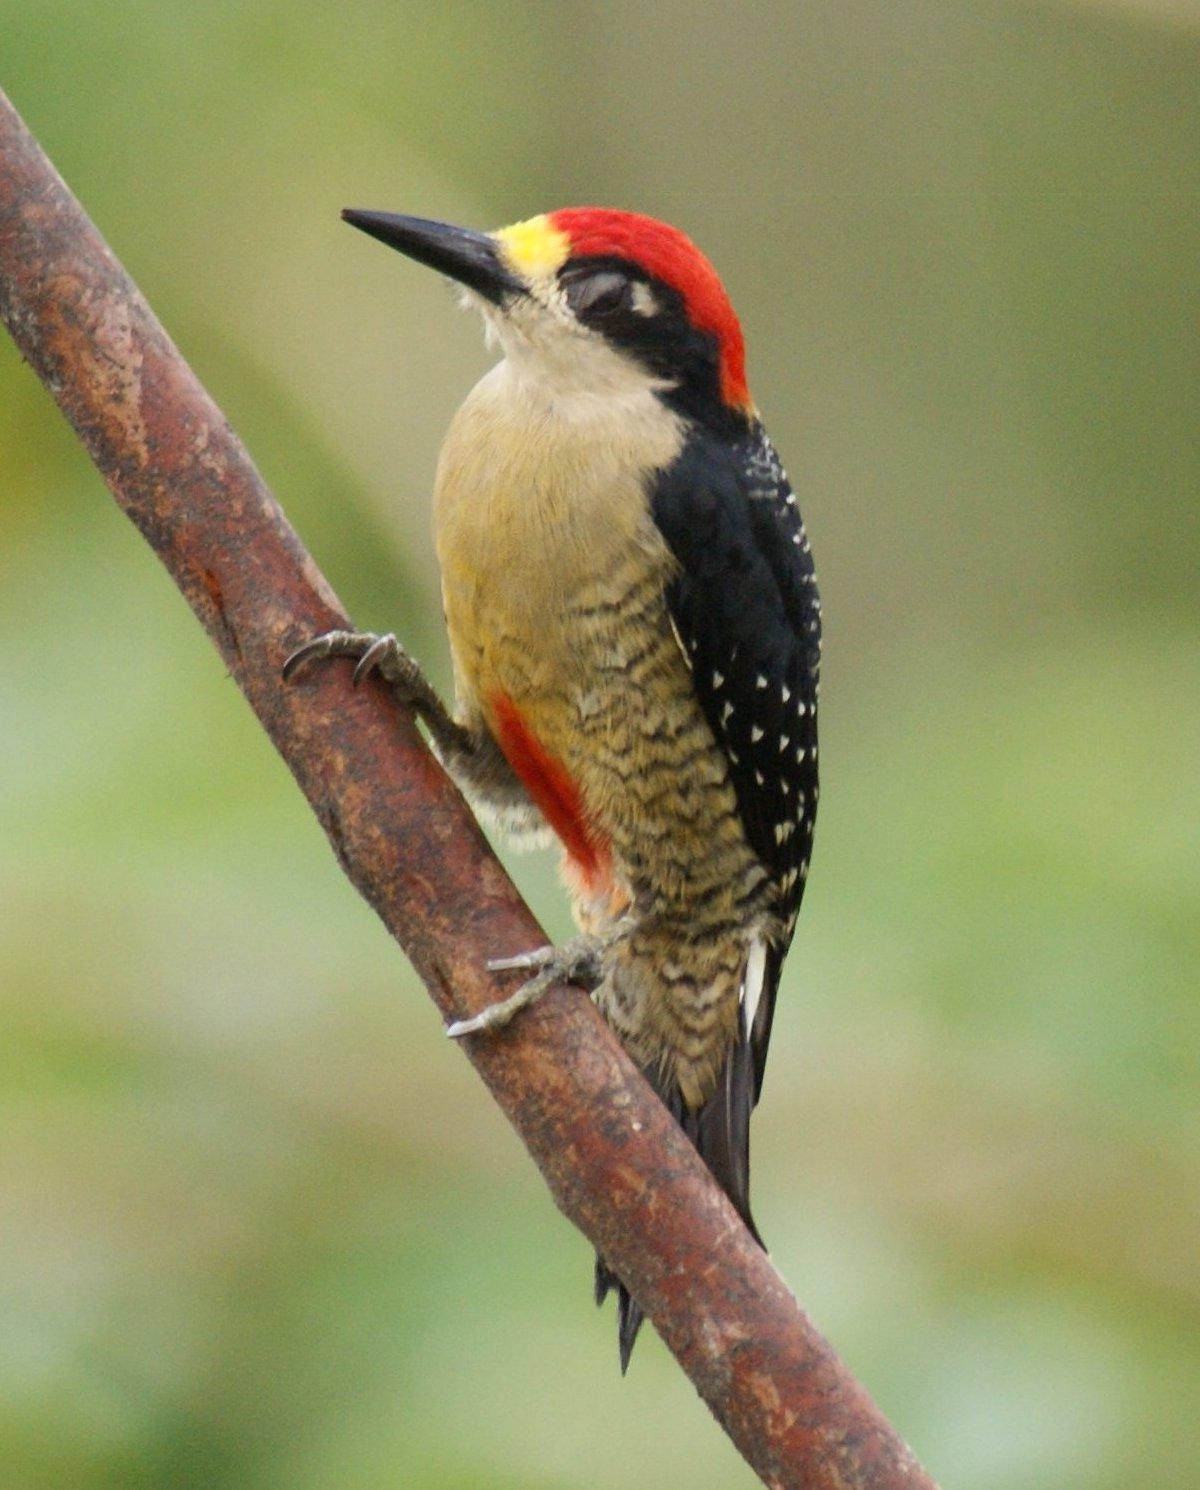 Black-cheeked Woodpecker Photo by Robin Oxley